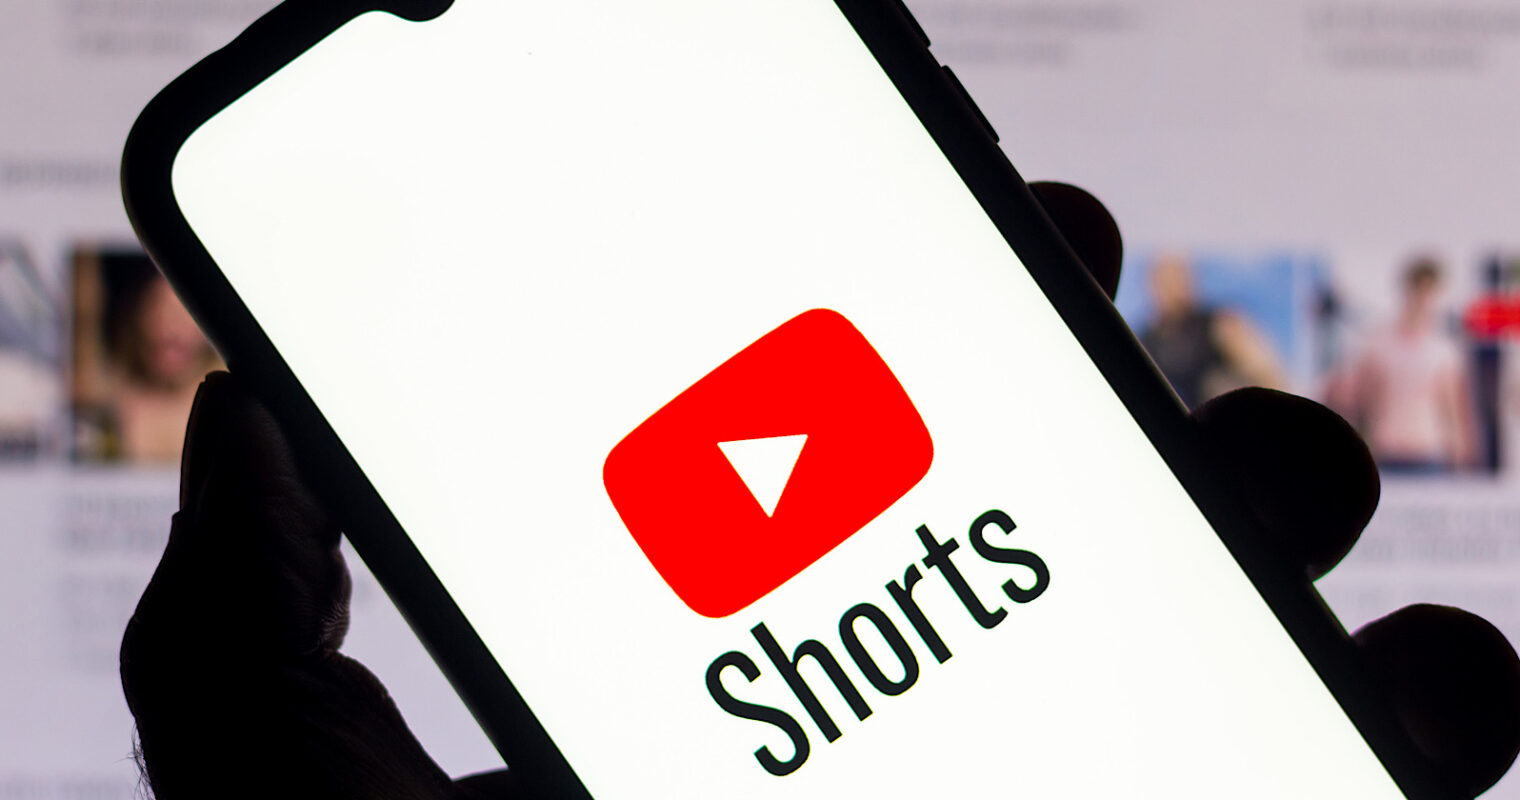 expanding Shorts to all US users